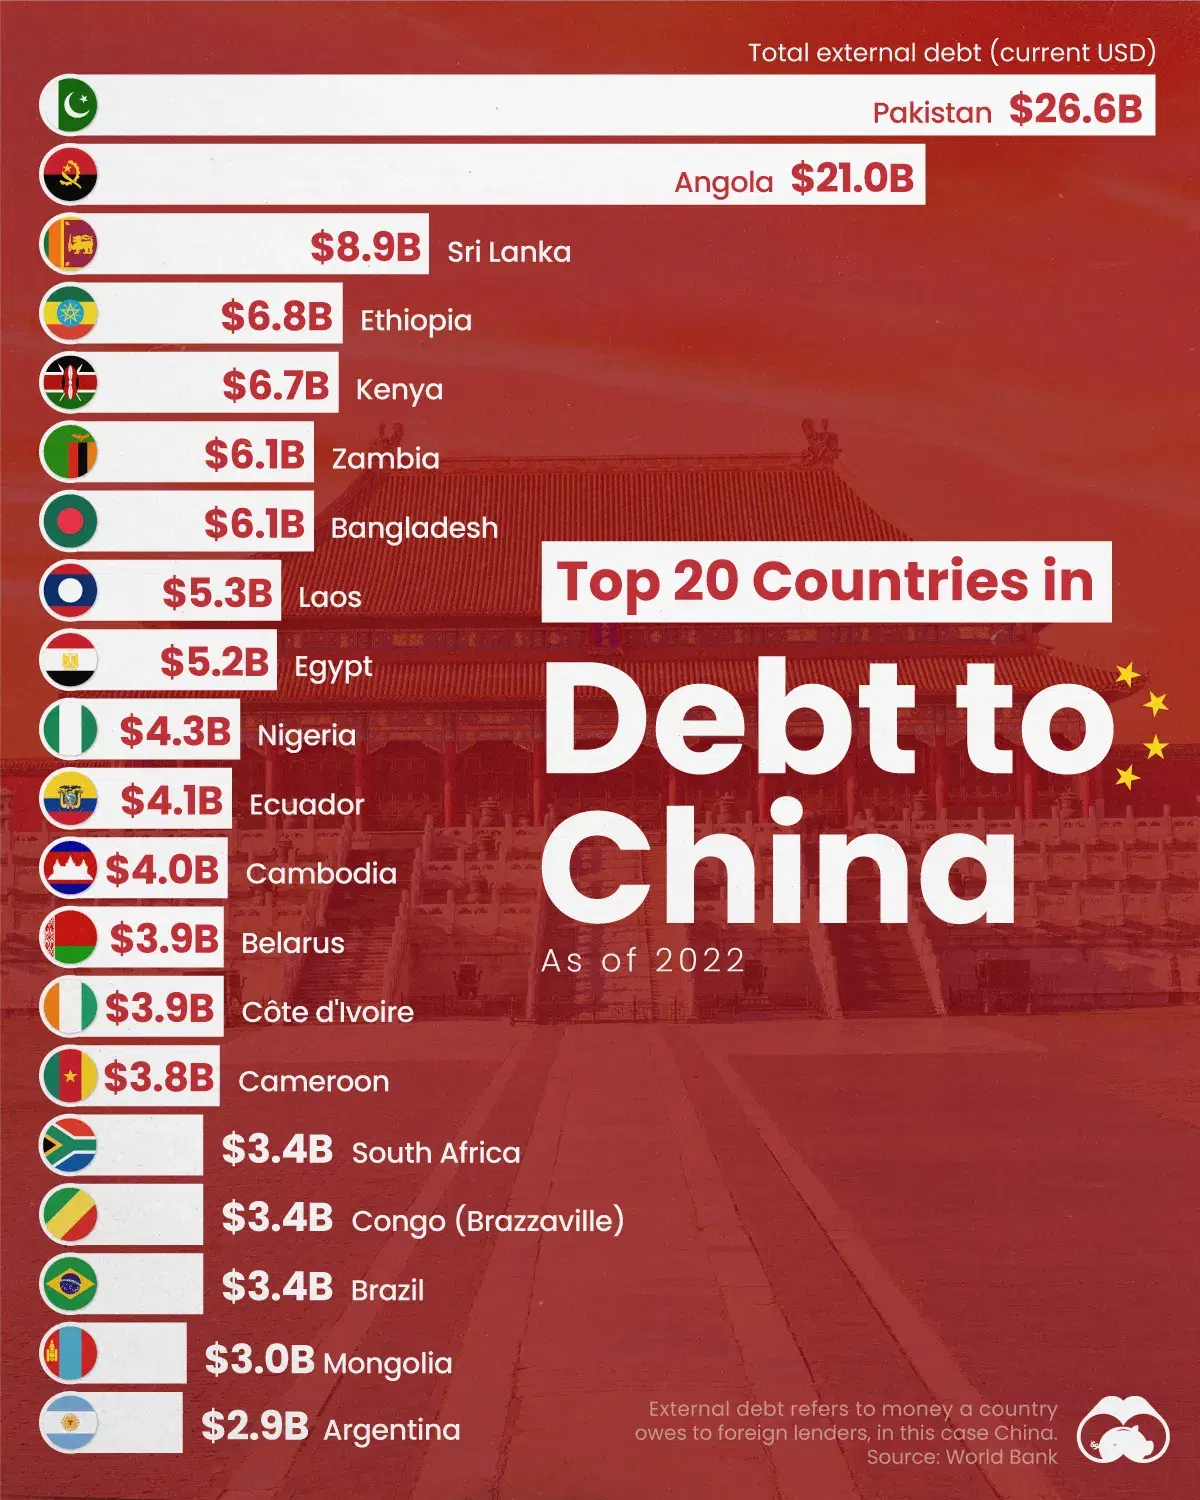 Pakistan is the World’s Most Indebted Country to China